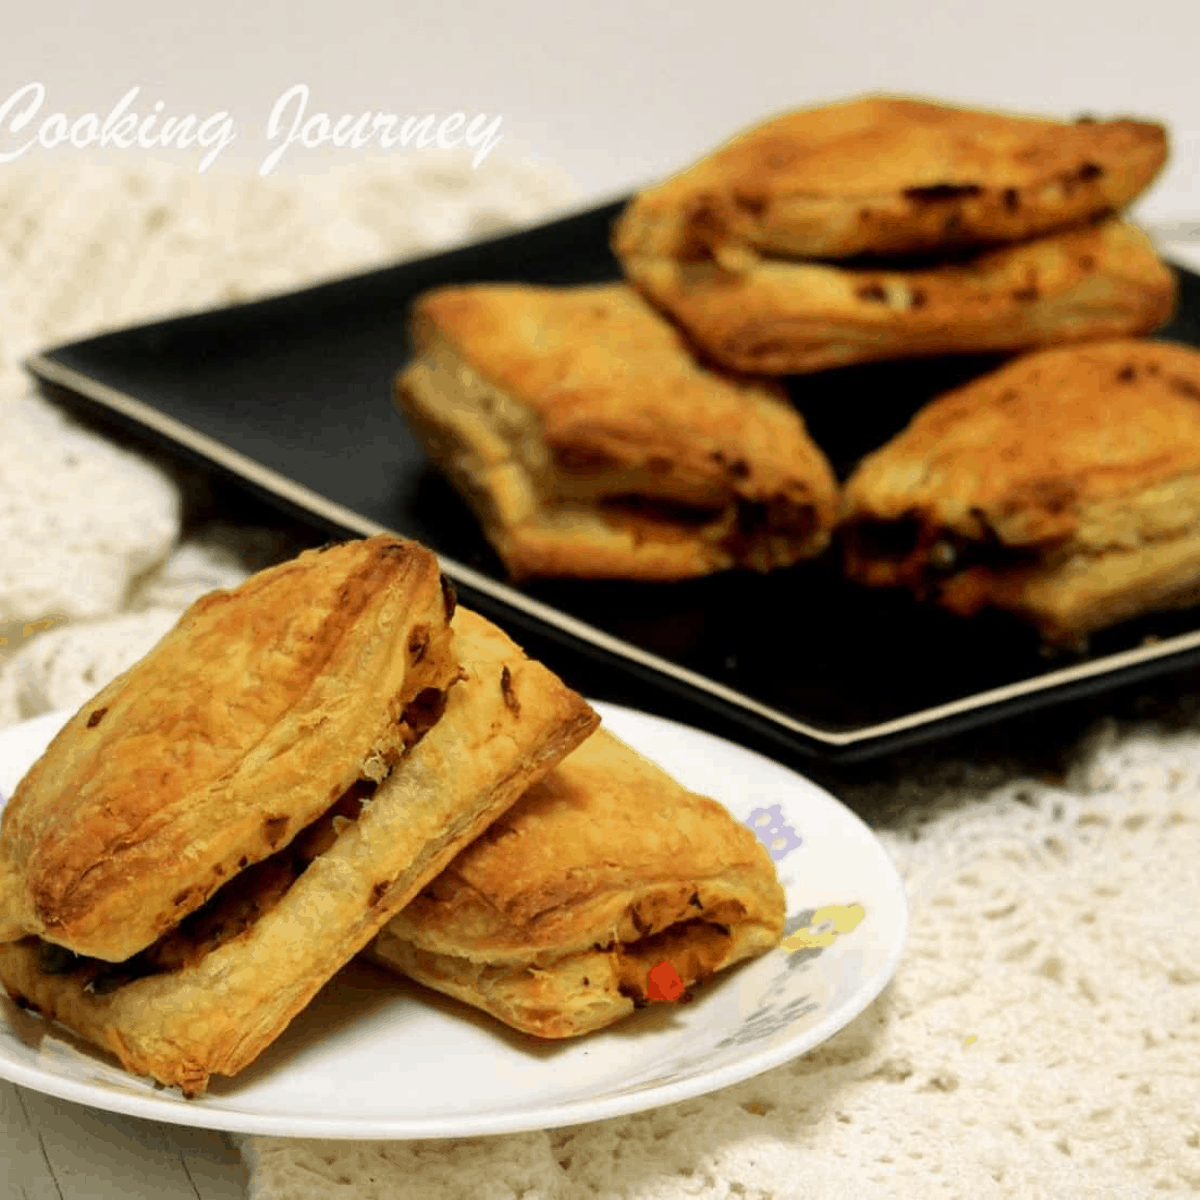 https://x9s2d6a3.rocketcdn.me/wp-content/uploads/2015/04/Vegetable-Puffs-Recipe-With-Pastry-Sheets.png